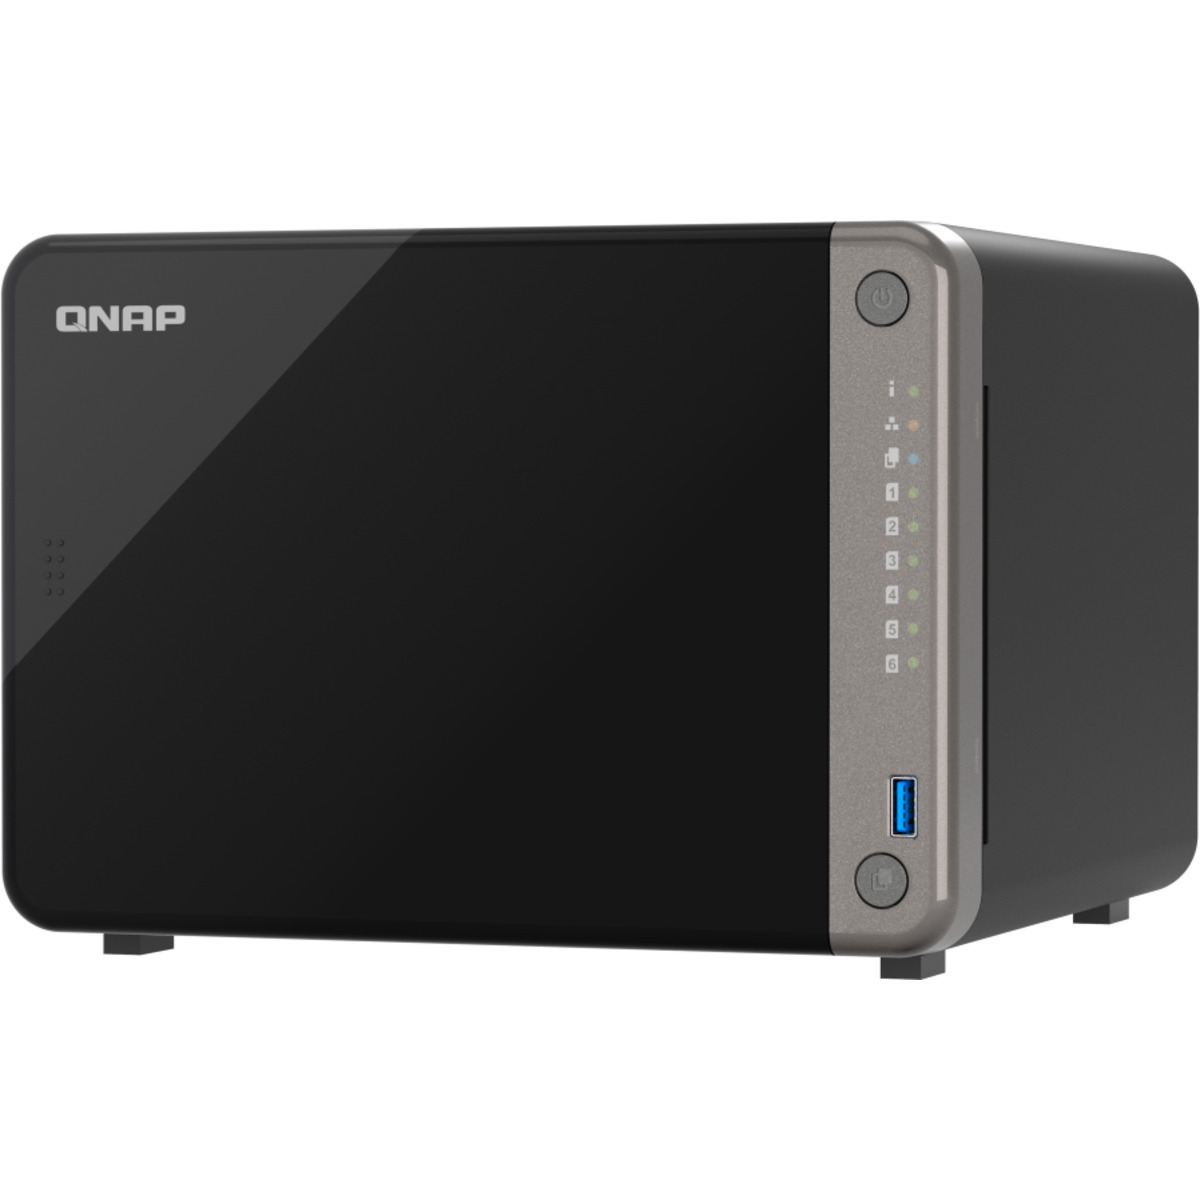 QNAP TS-AI642 30tb 6-Bay Desktop Multimedia / Power User / Business NAS - Network Attached Storage Device 5x6tb Seagate BarraCuda ST6000DM003 3.5 5400rpm SATA 6Gb/s HDD CONSUMER Class Drives Installed - Burn-In Tested TS-AI642